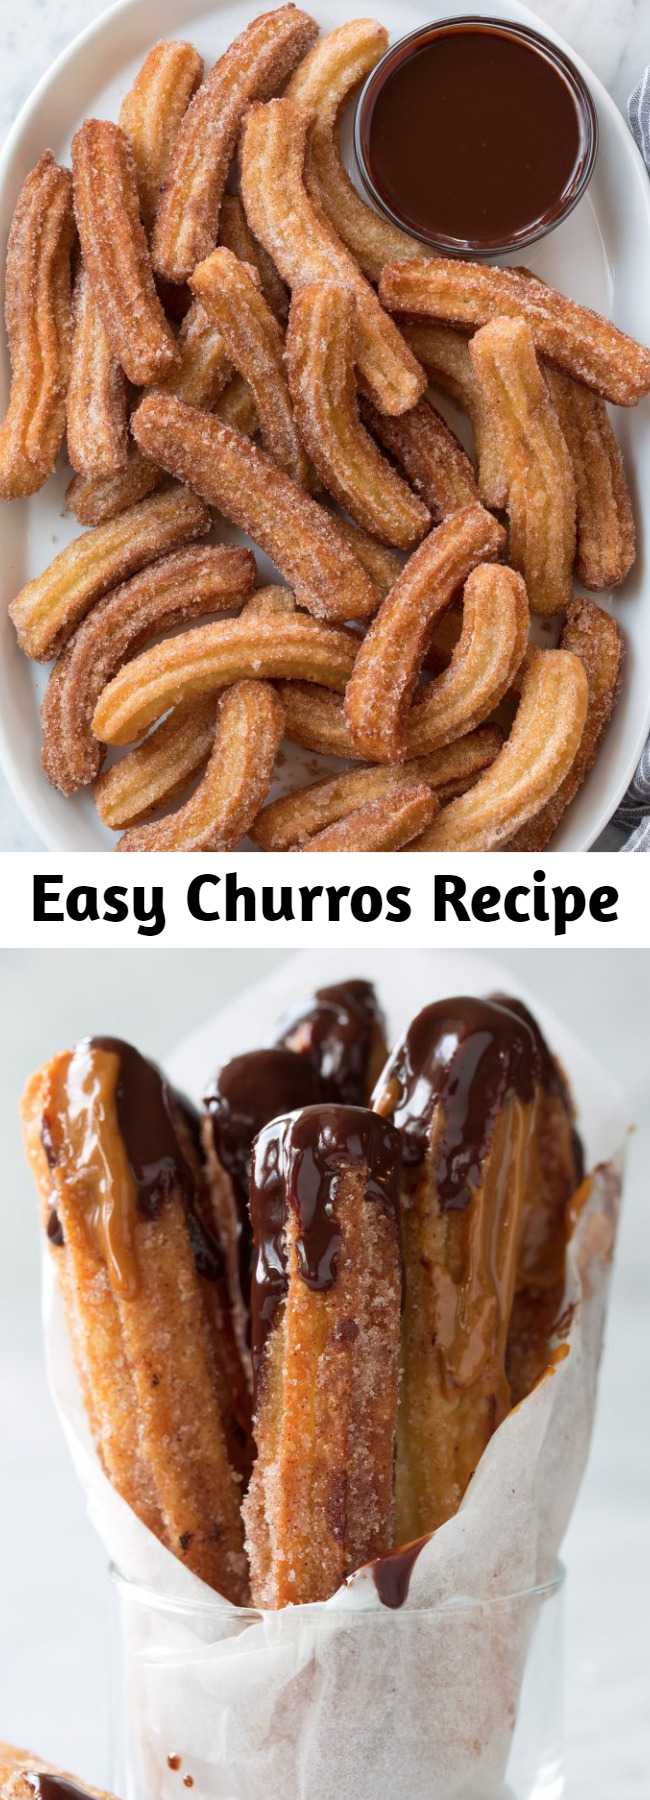 Easy Churros Recipe - There's nothing like a fresh homemade churro. Easily one of my favorite treats! They're crispy on the outside, soft and tender on the inside and they have the most irresistable flavor. Plus they're easier to make than you'd think. Always a crowd favorite! Plan on two per person or pipe out longer churros. #churros #mexicanfood #recipe #dessert